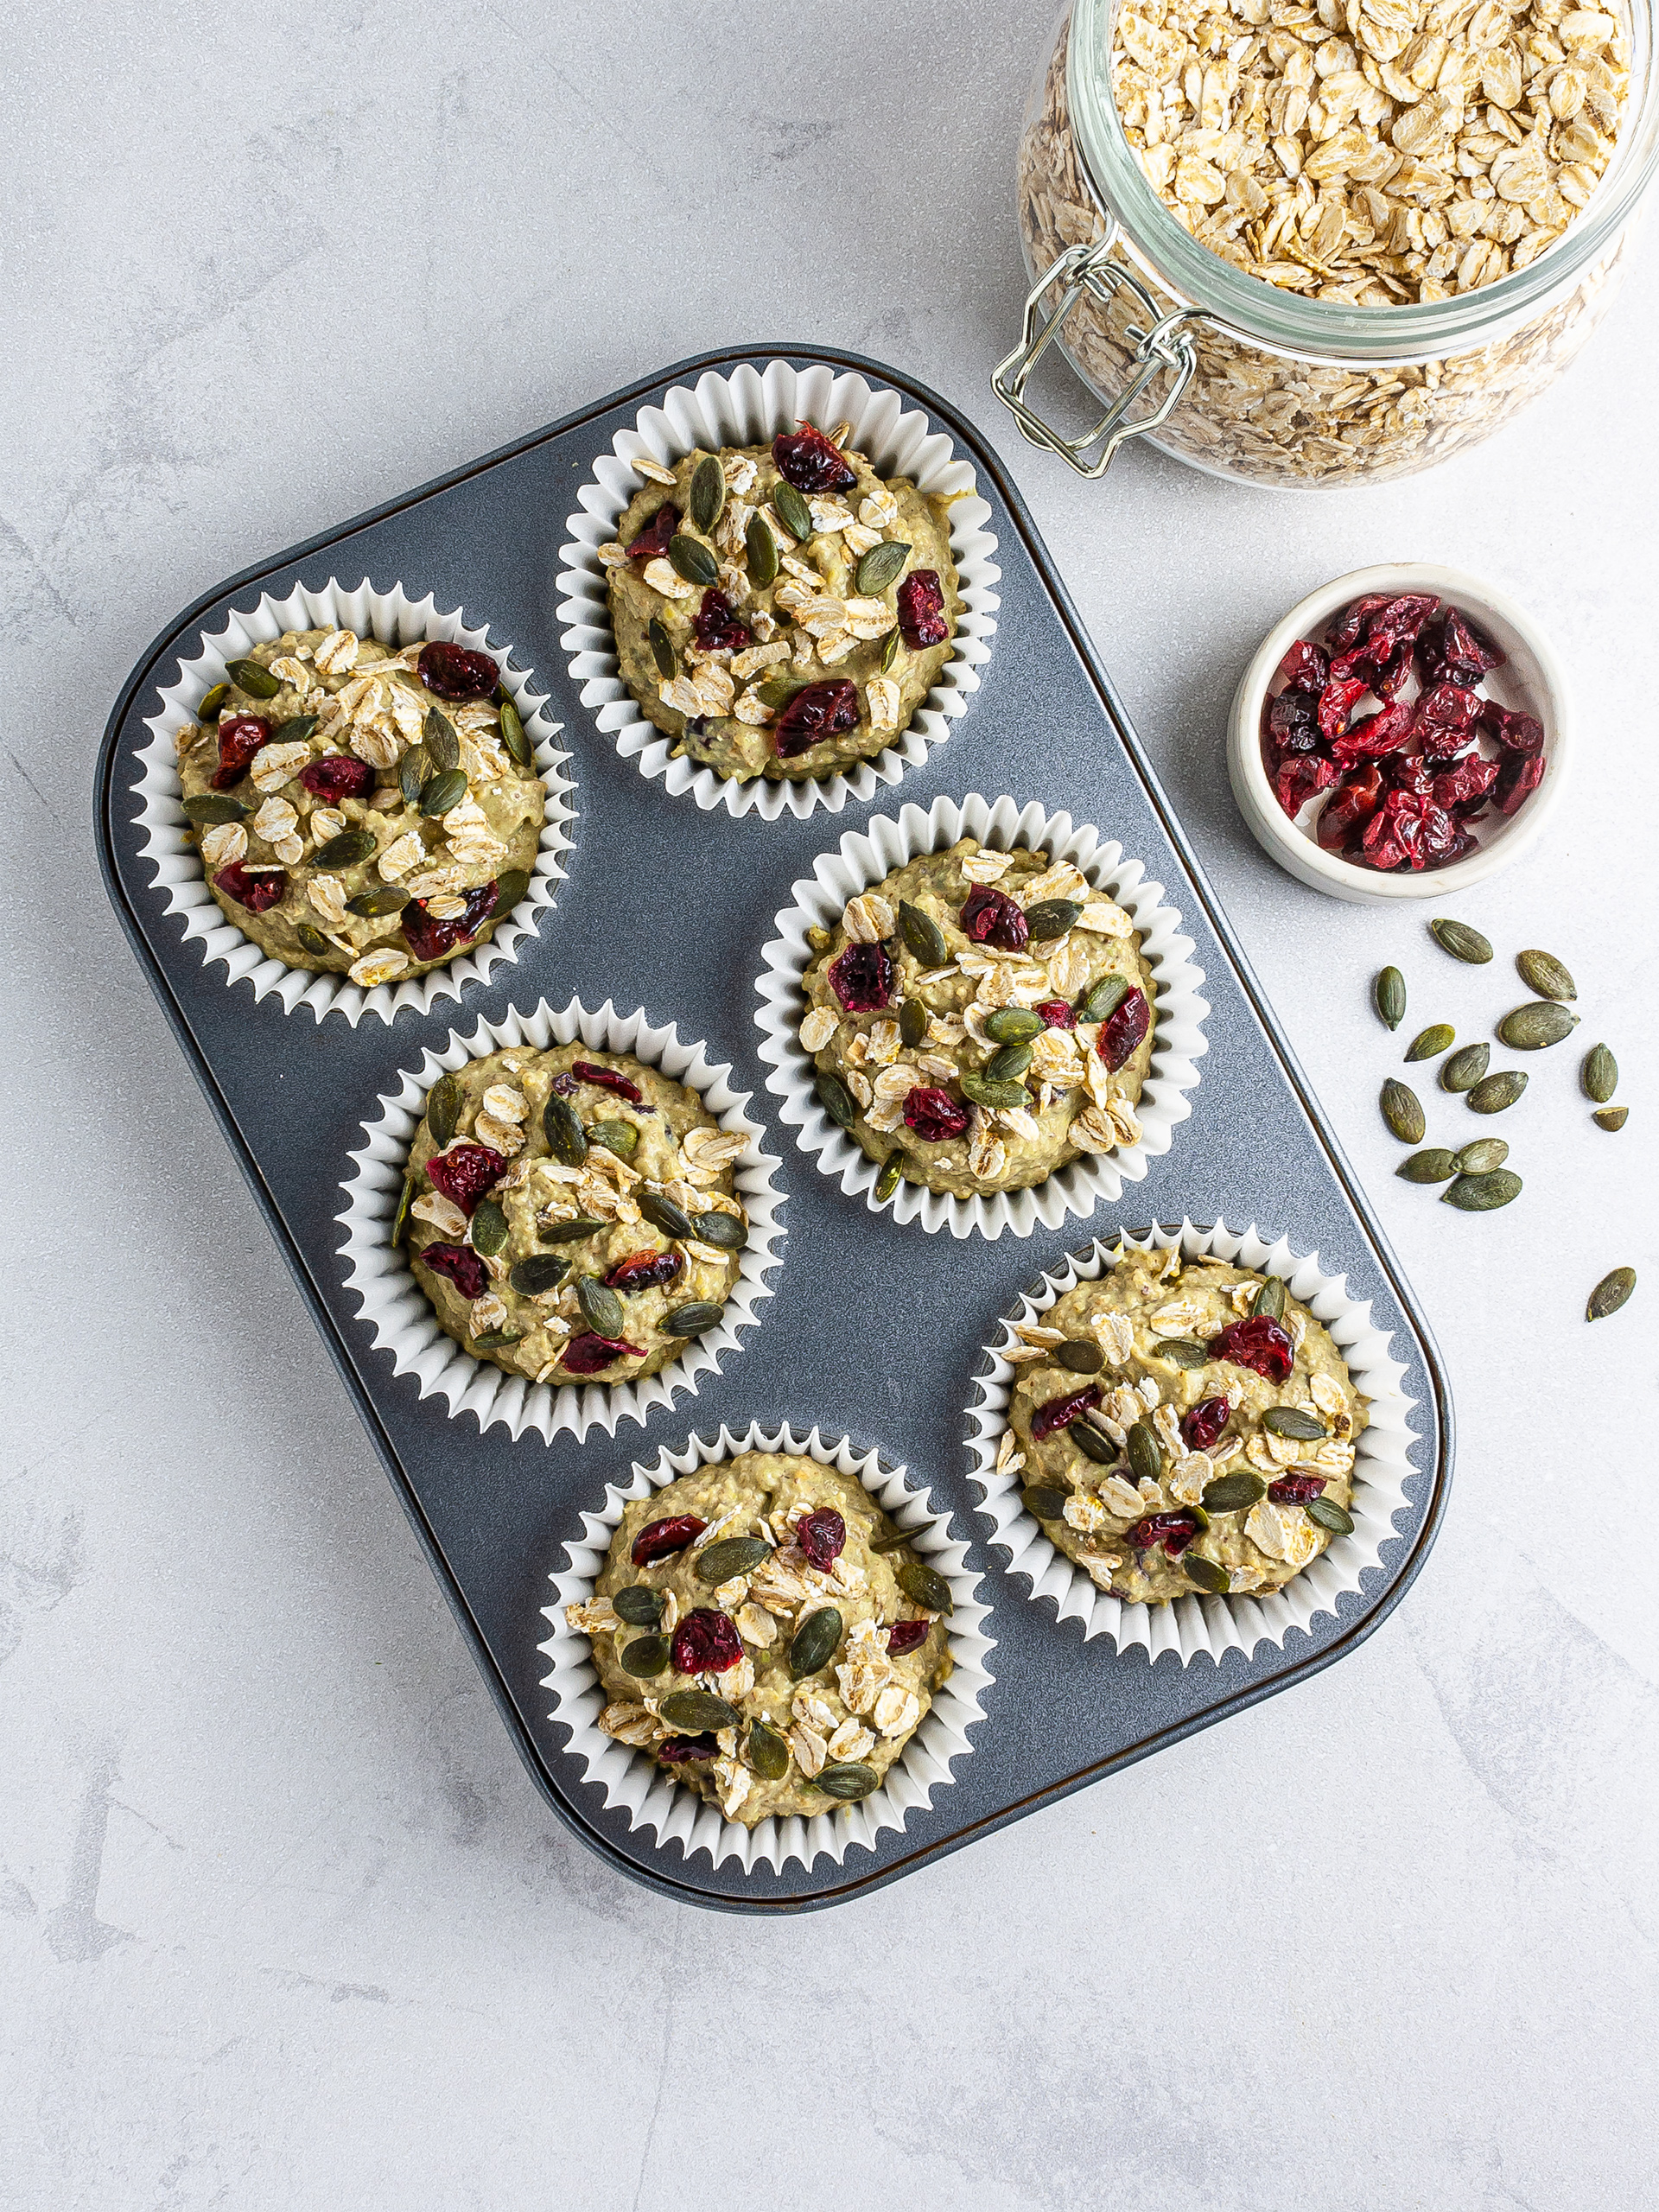 Muffin batter in muffin cases garnished with oats, pumpkin seeds and cranberries